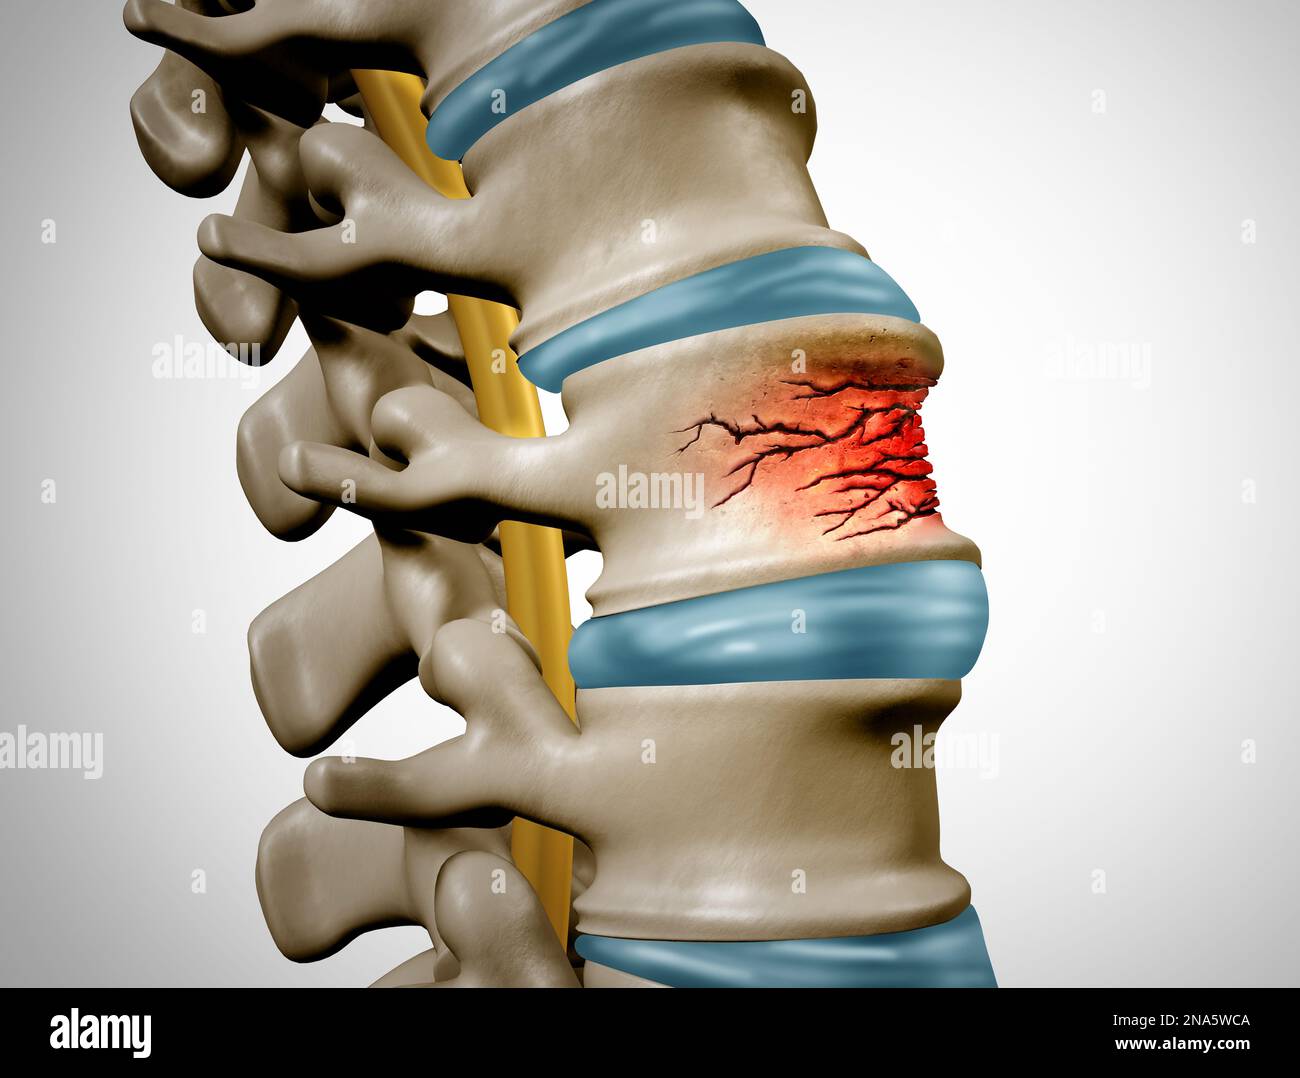 Traumatic Spine Fracture and vertebral injury medical concept as a human anatomy spinal column with a broken burst vertebra due to compression Stock Photo